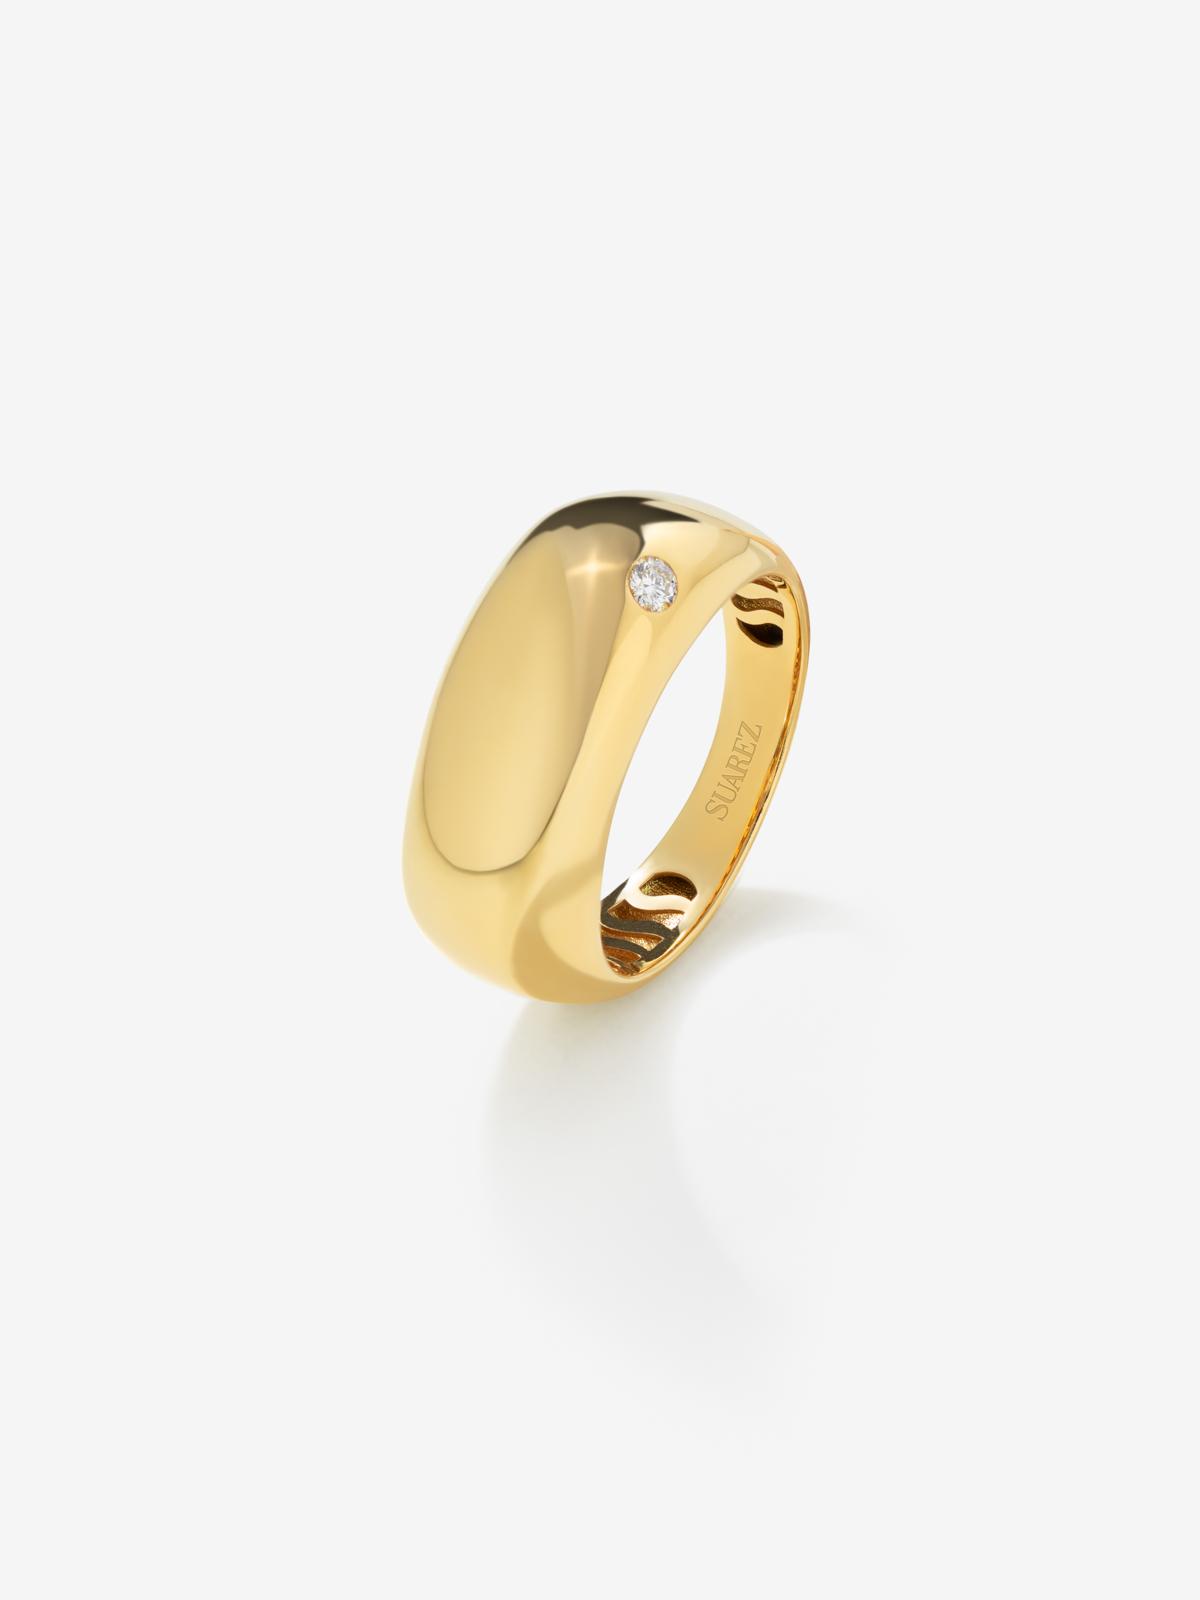 18K Yellow gold seal ring with diamond.